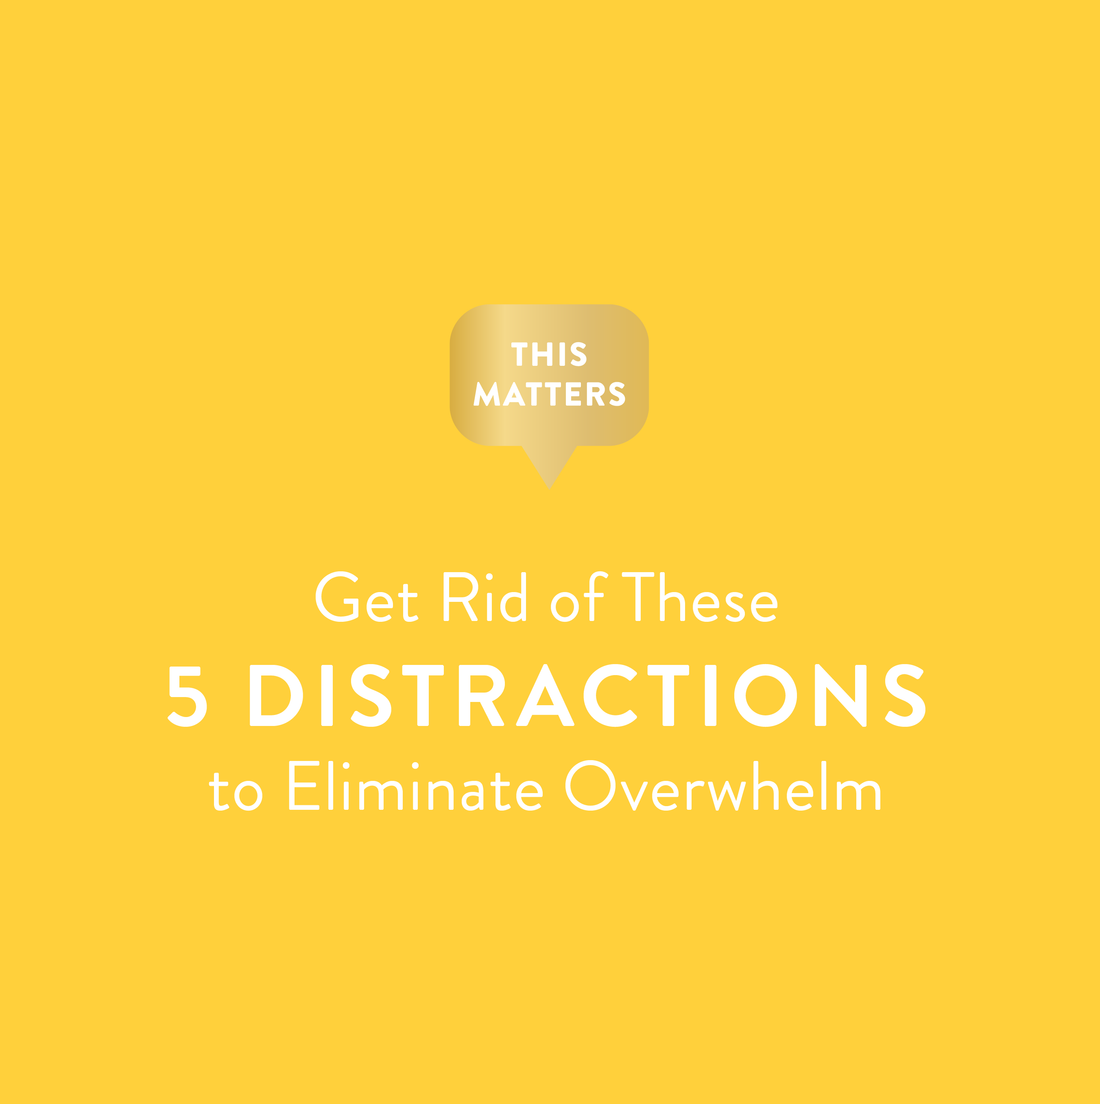 Get rid of these 5 distractions to eliminate overwhelm